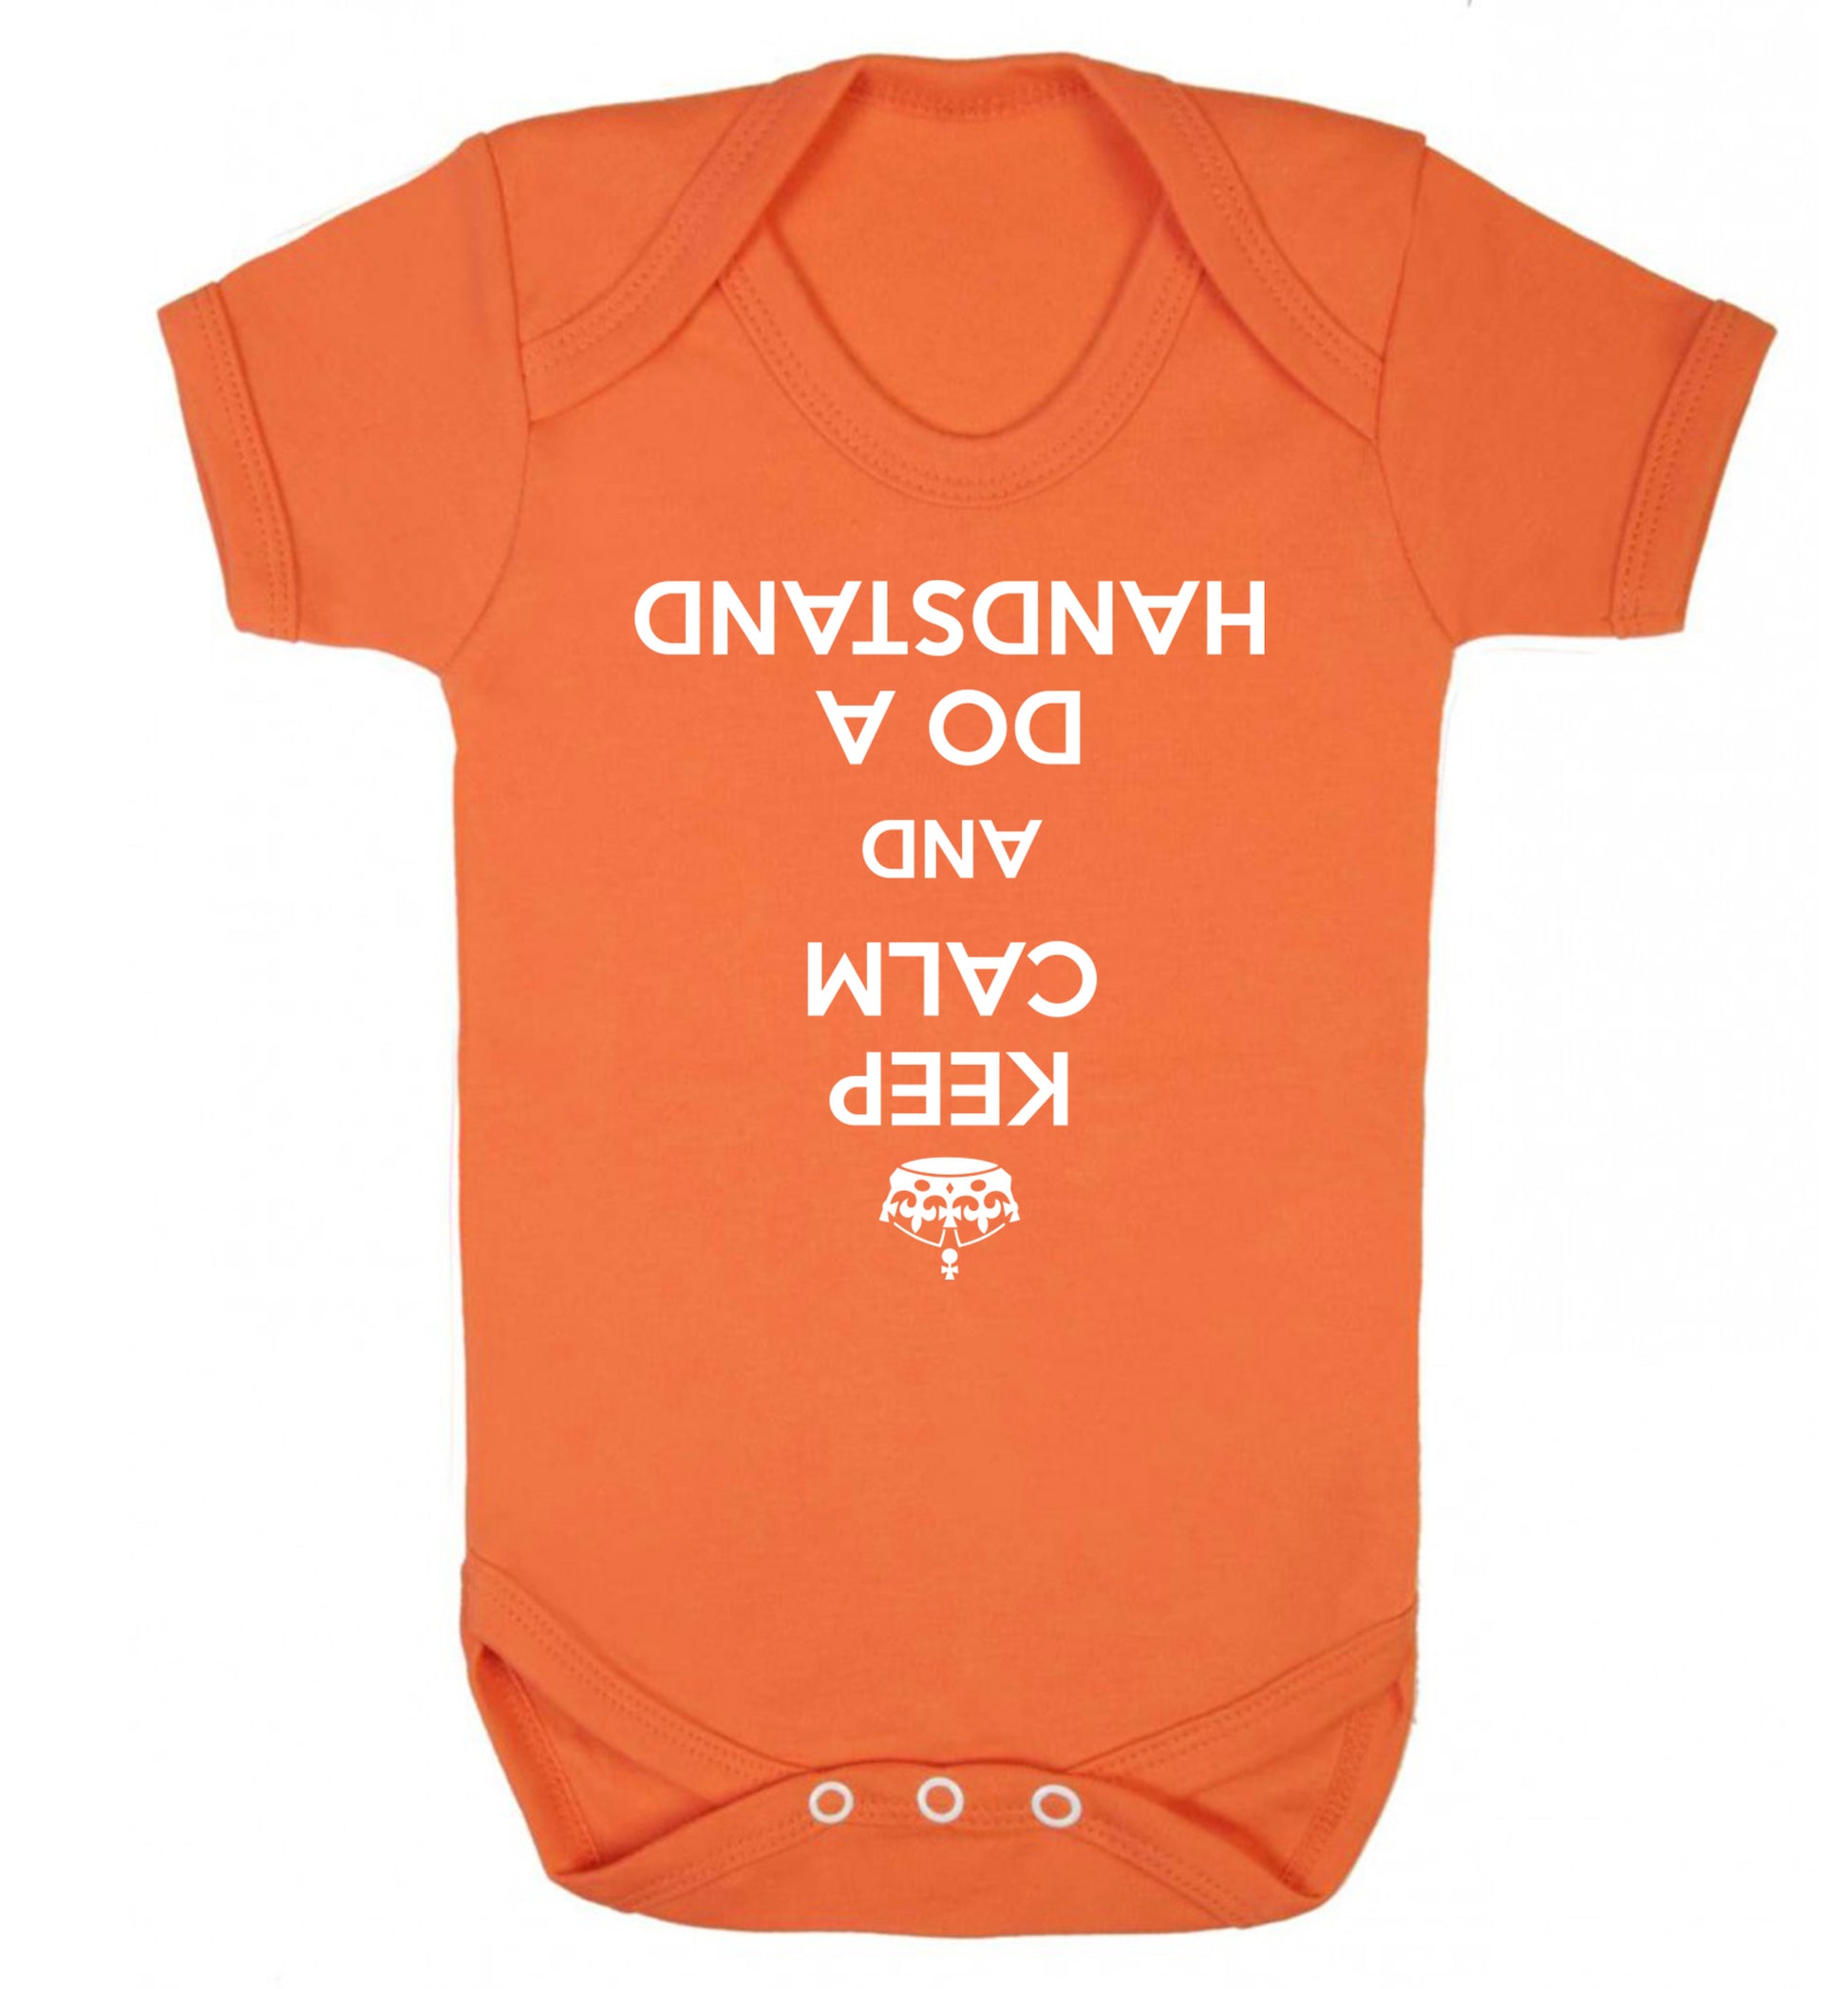 Keep calm and do a handstand Baby Vest orange 18-24 months